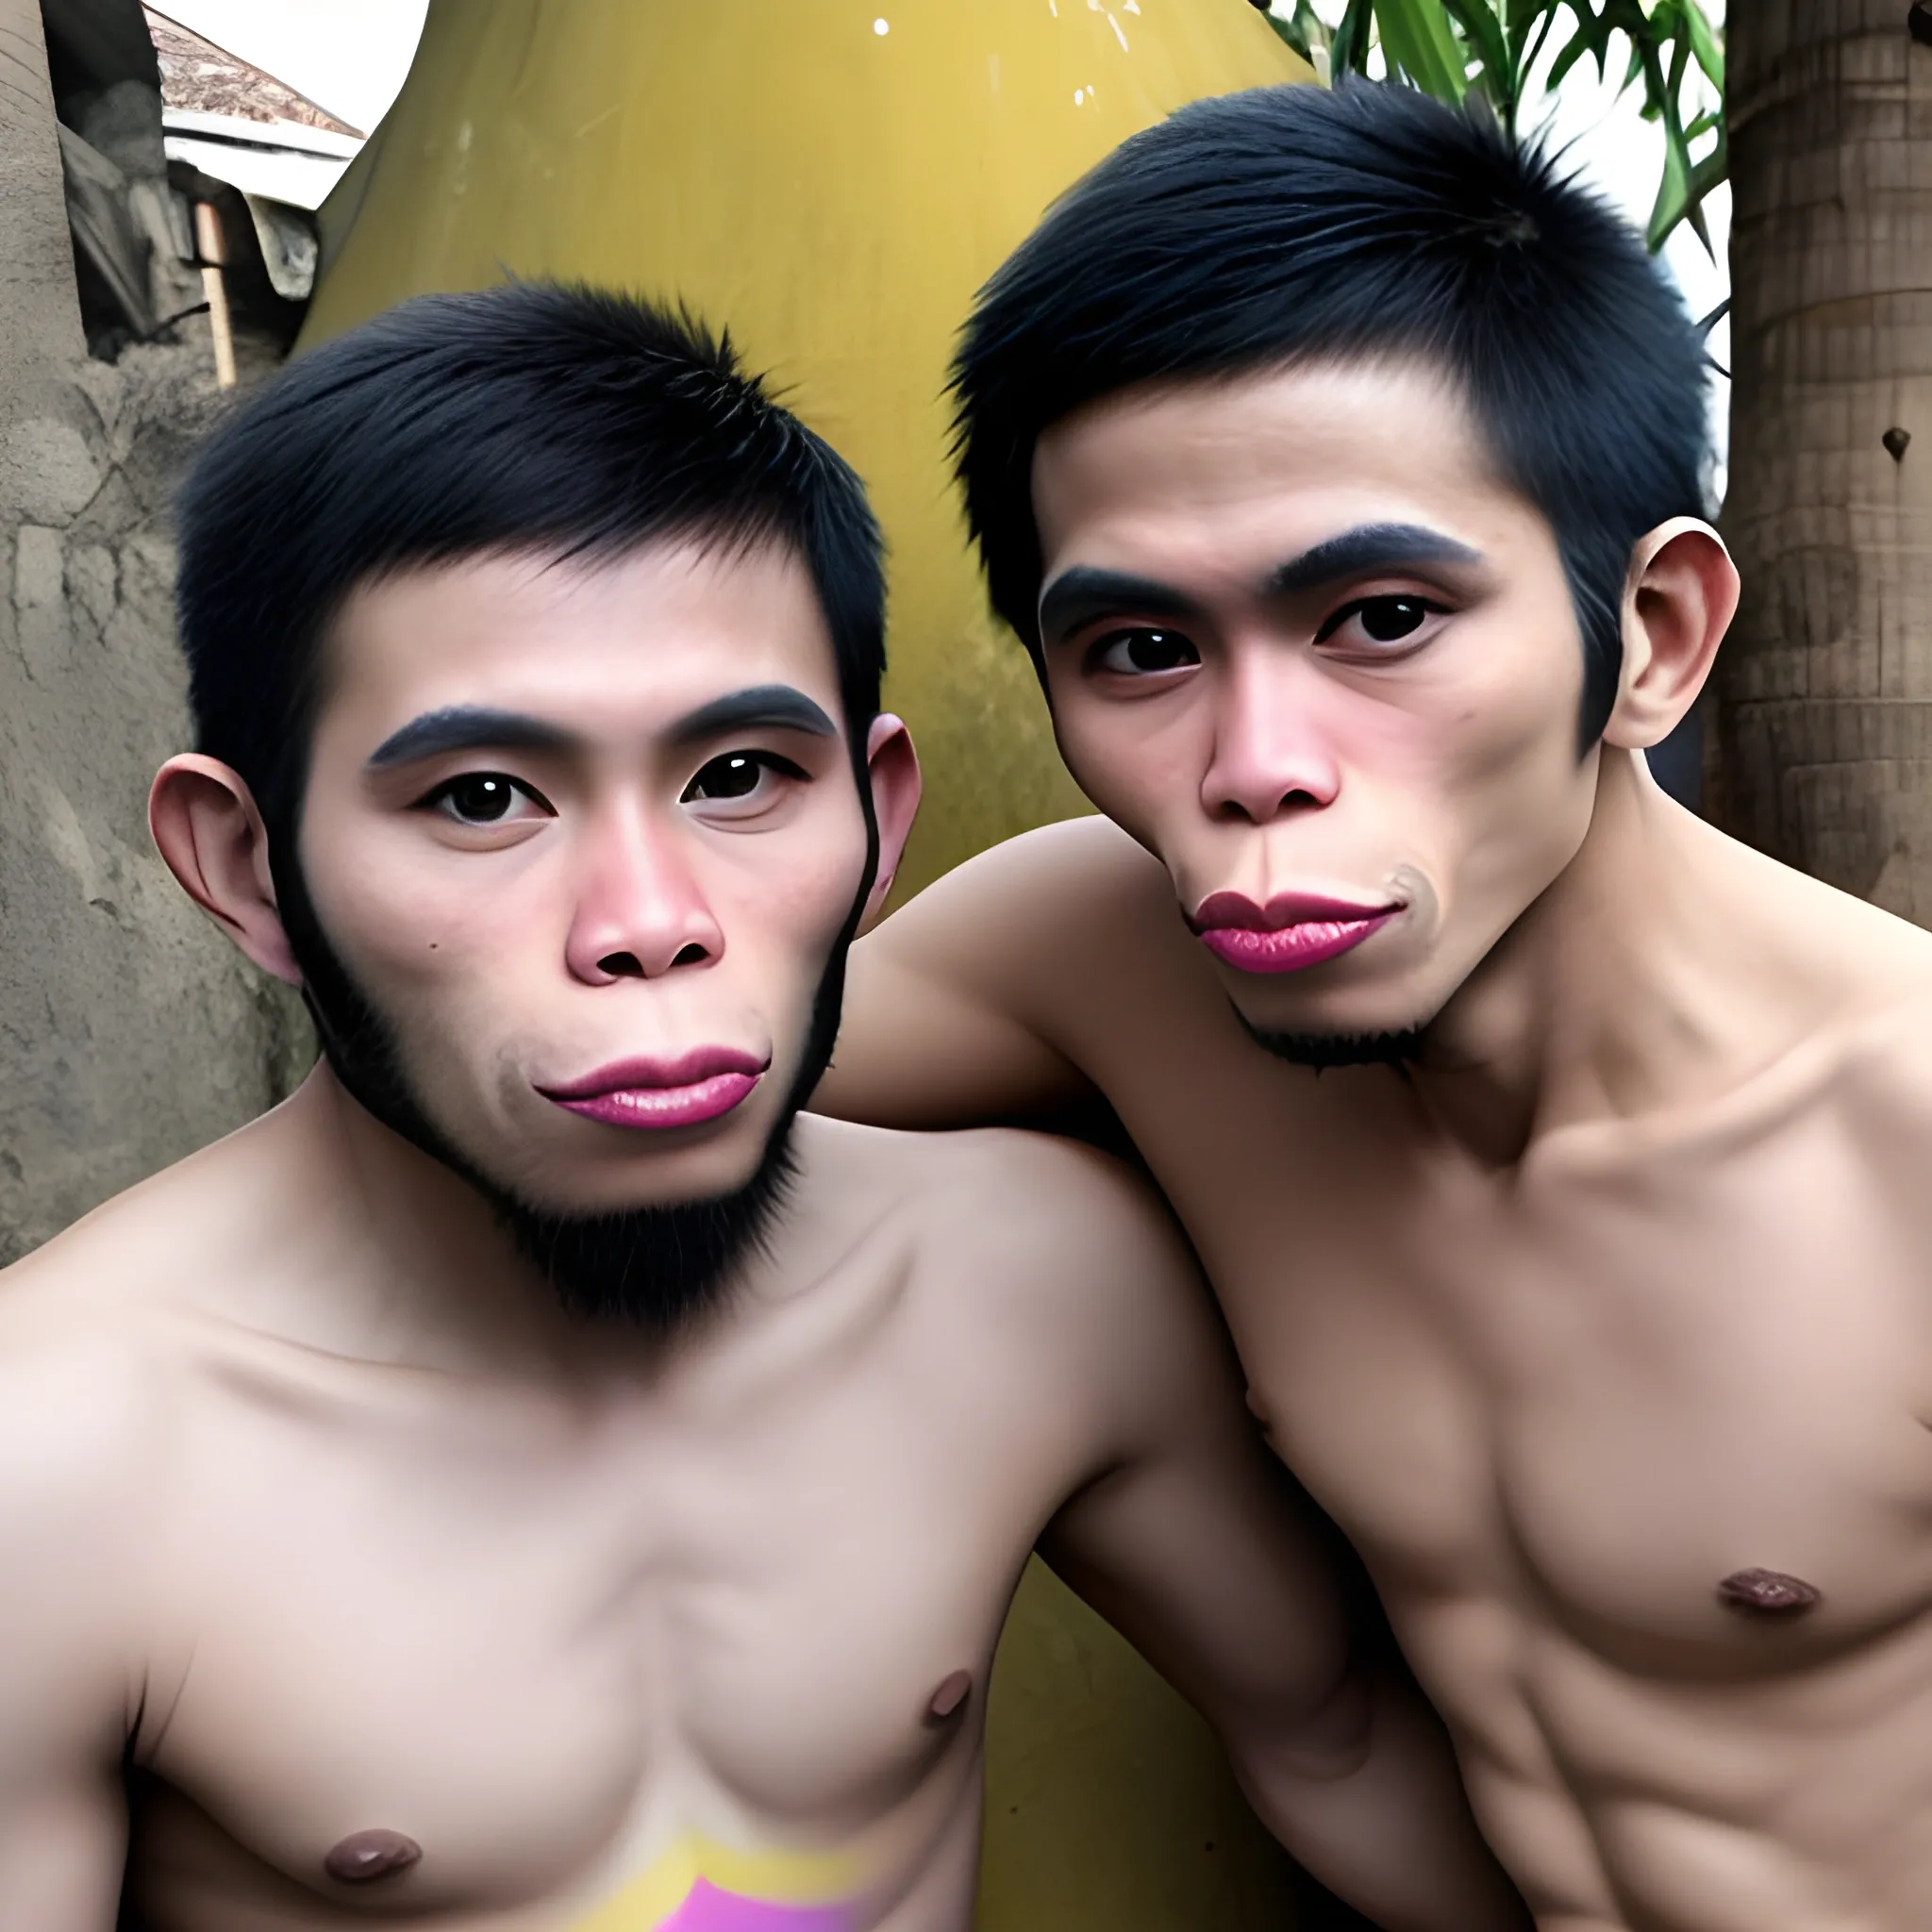  monkey and pipel lgbt
